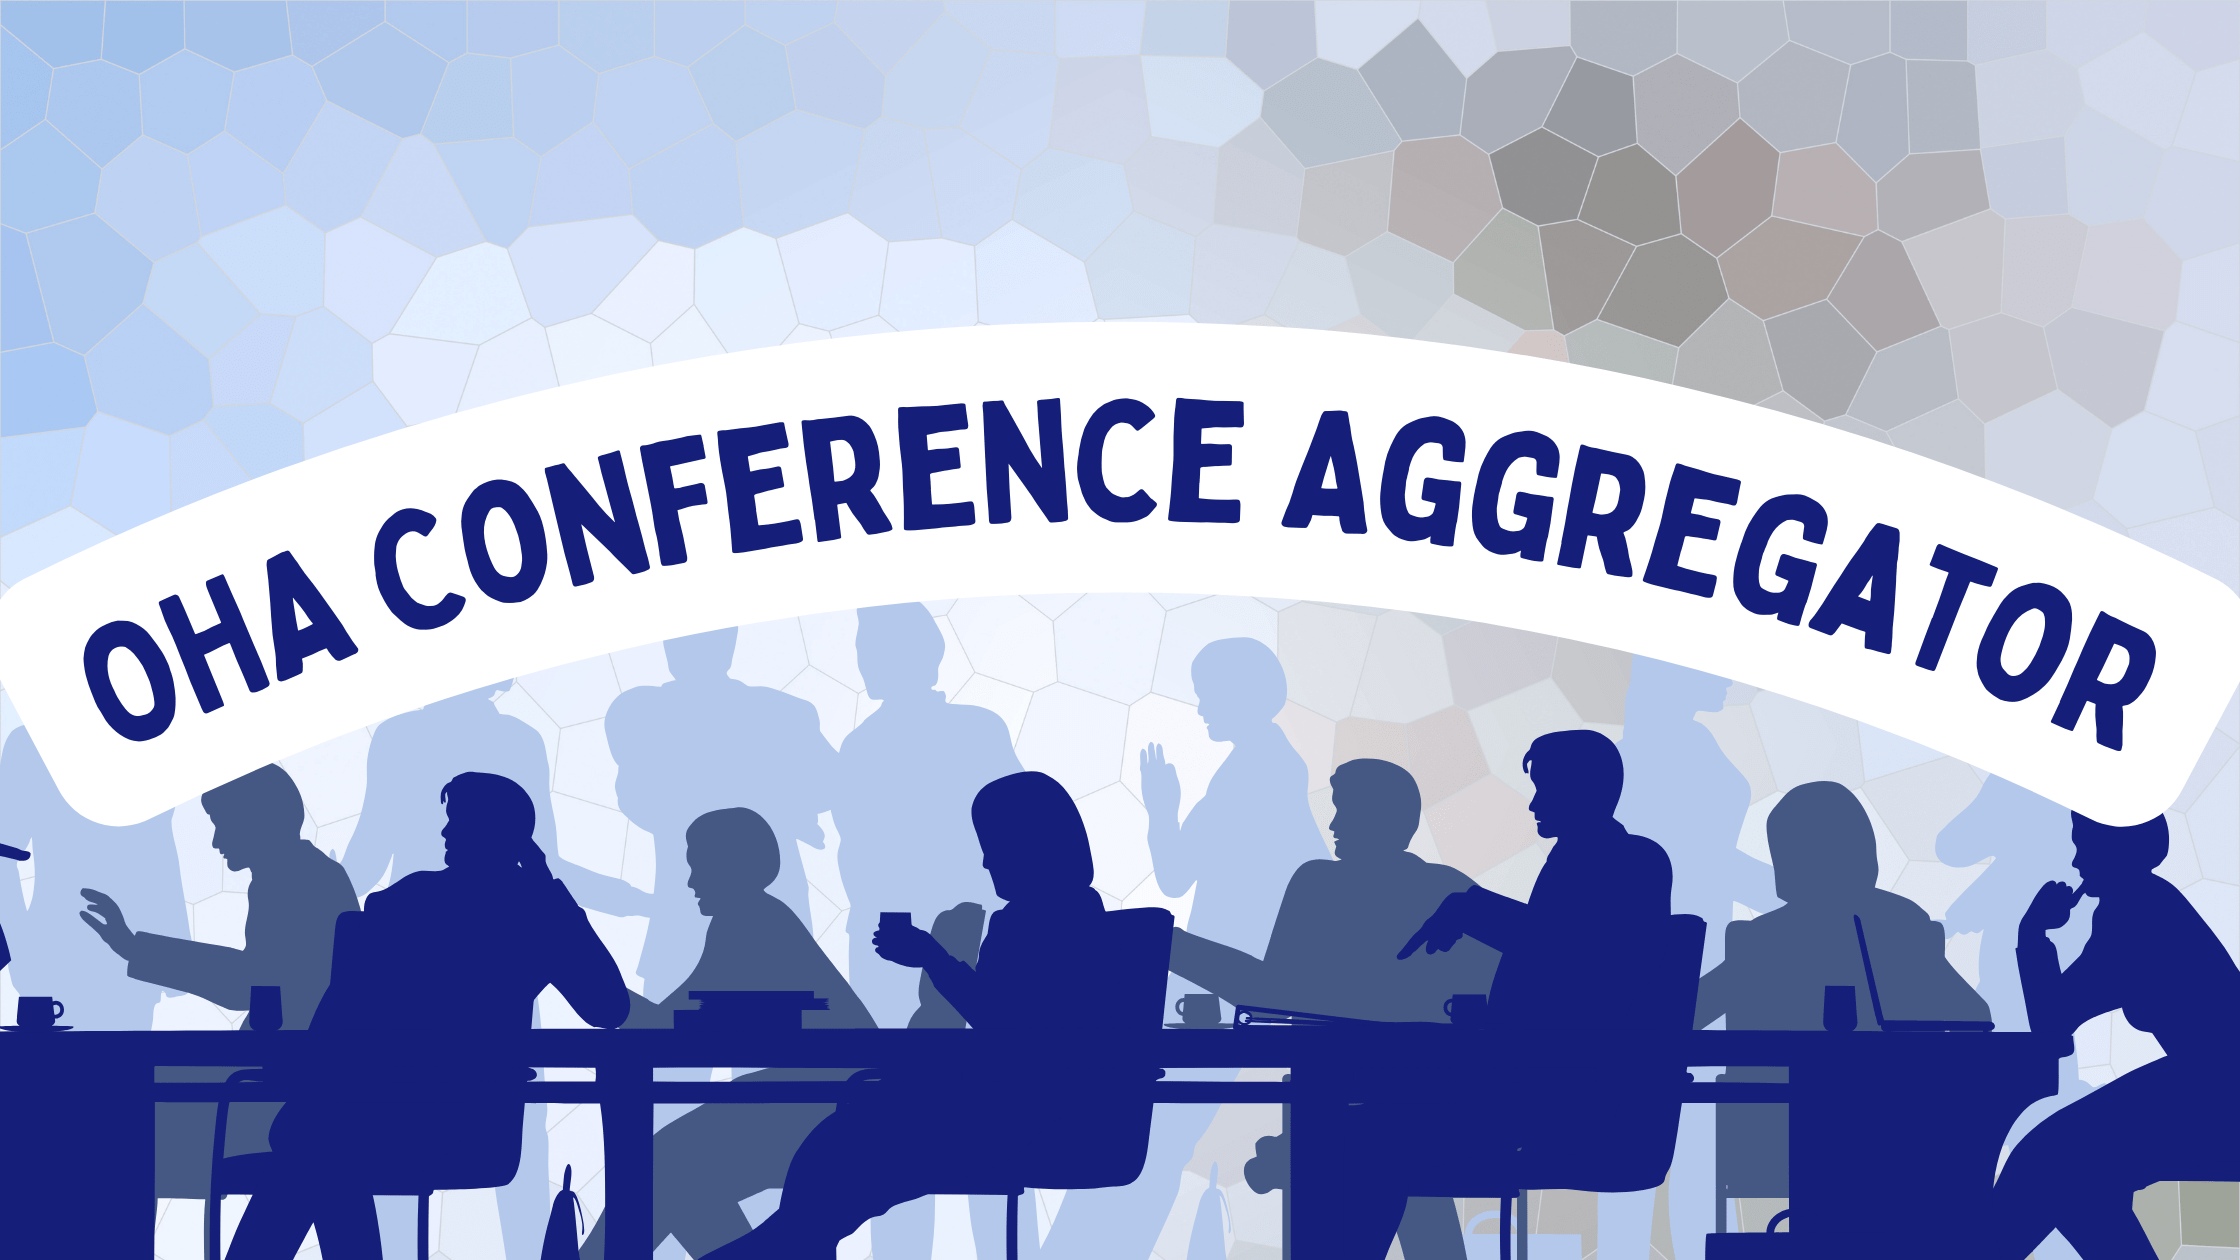 Introducing the OHA Conference Aggregator!